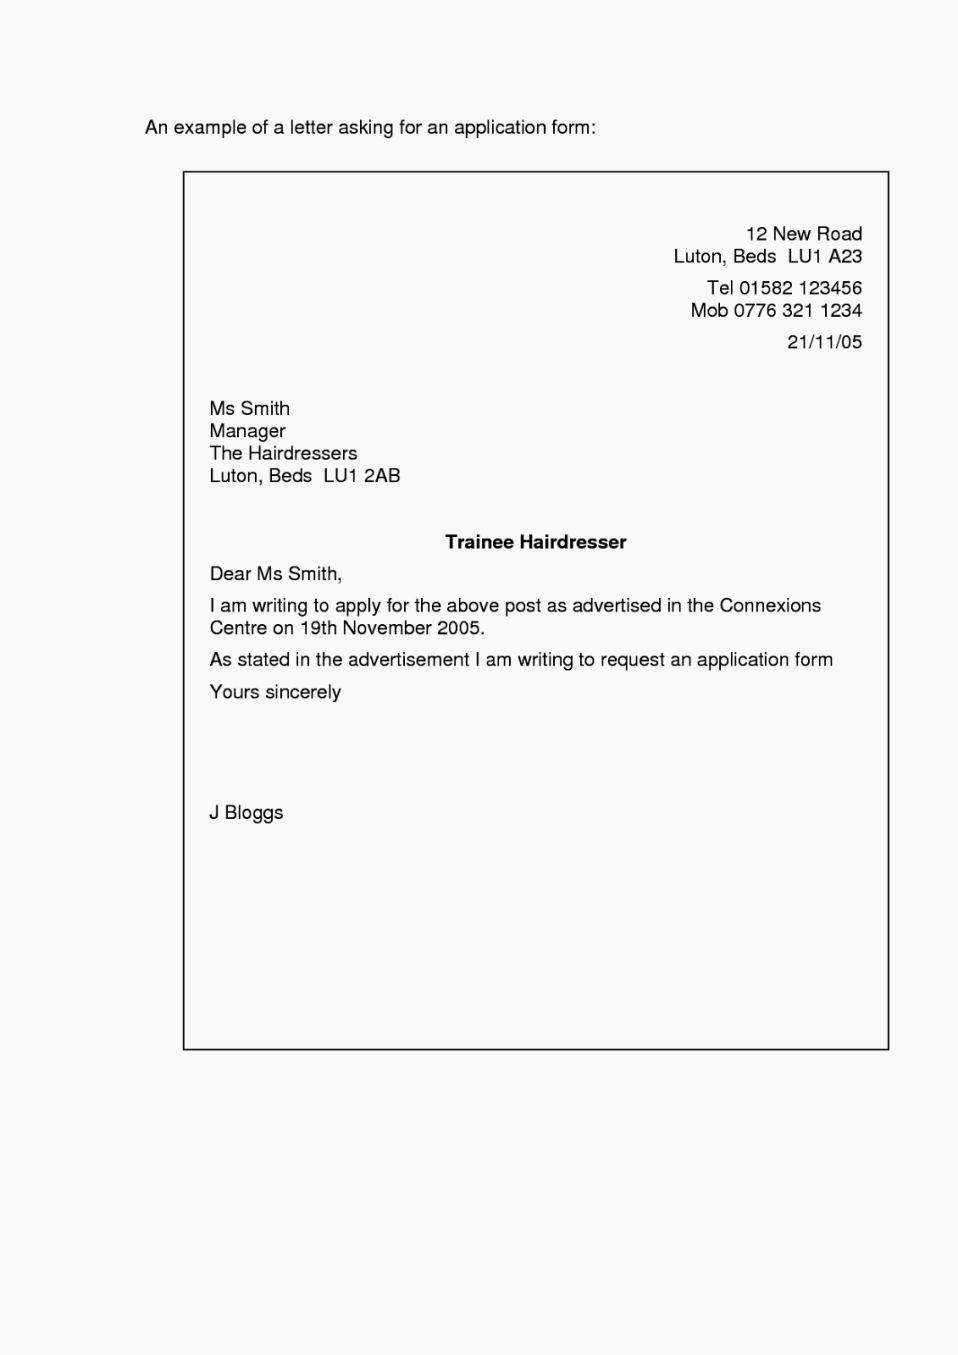 Email Cover Letter Templates New Covering Letter Email Sample Conserving Your Own Secrecy